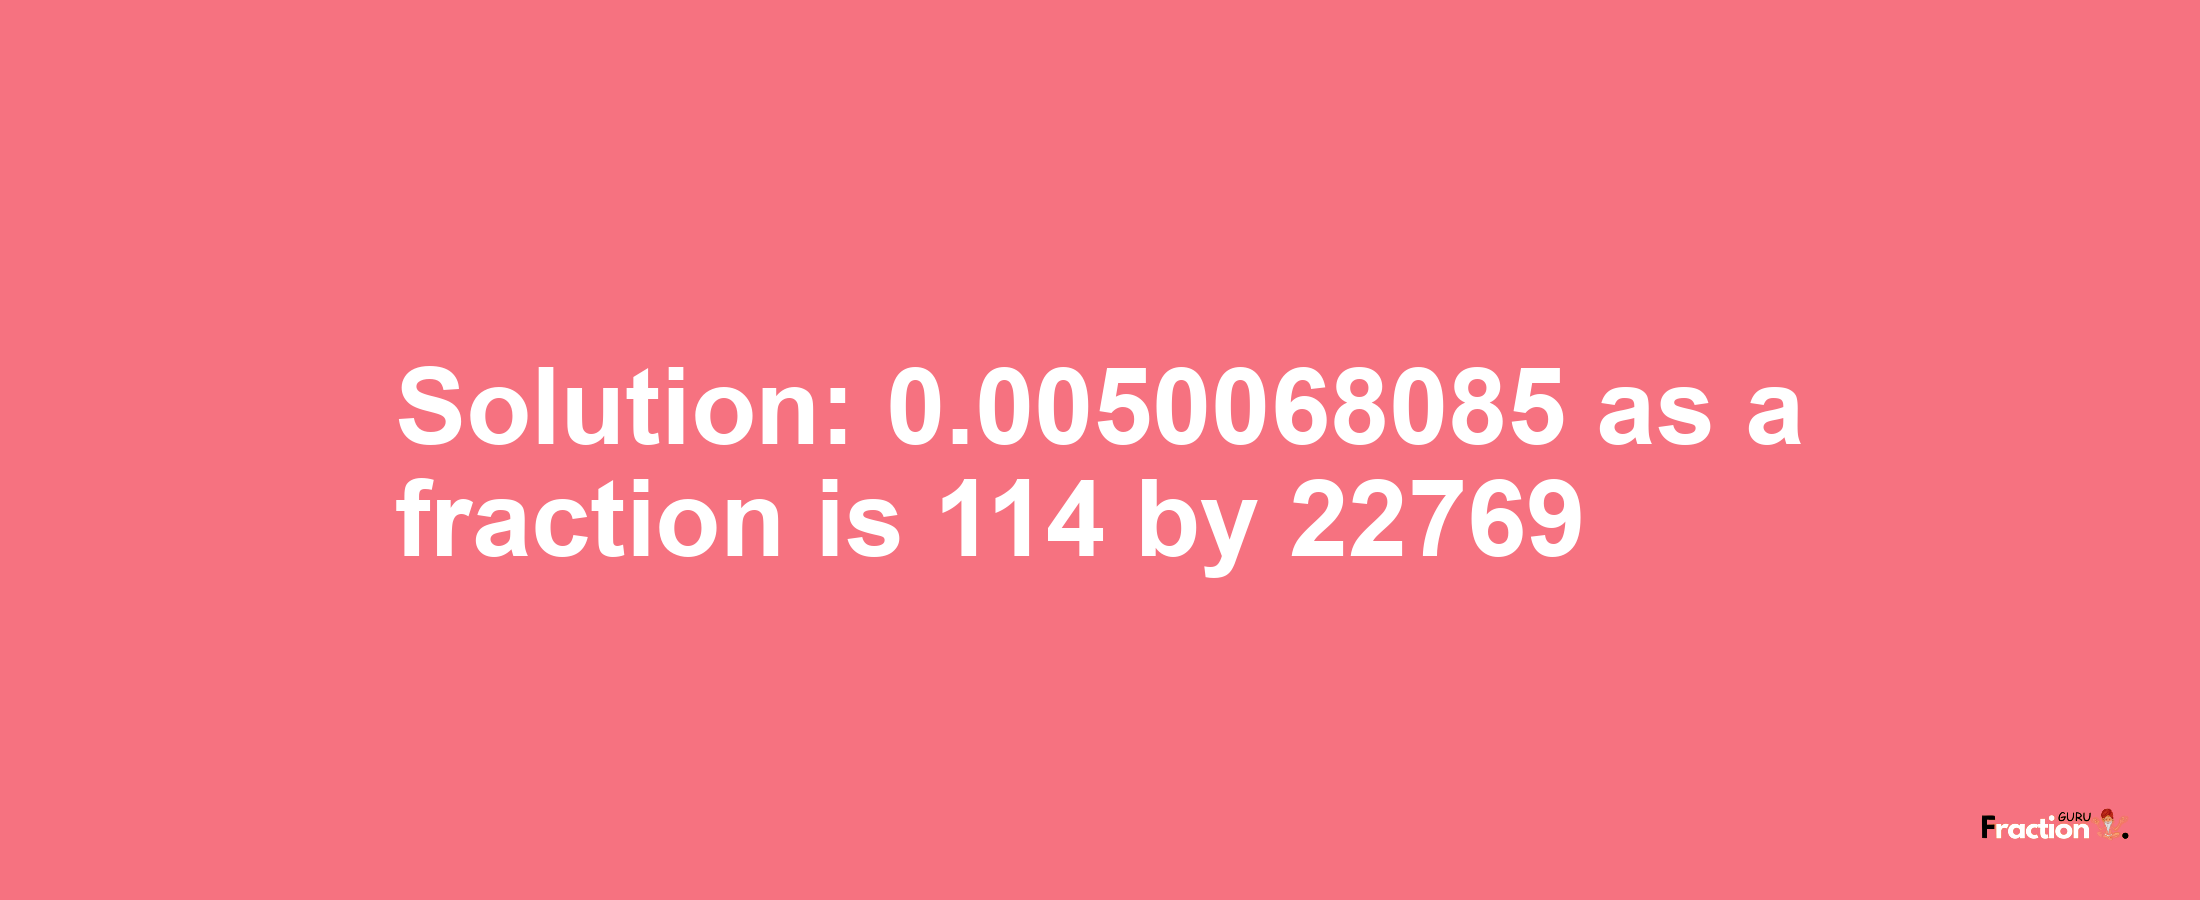 Solution:0.0050068085 as a fraction is 114/22769